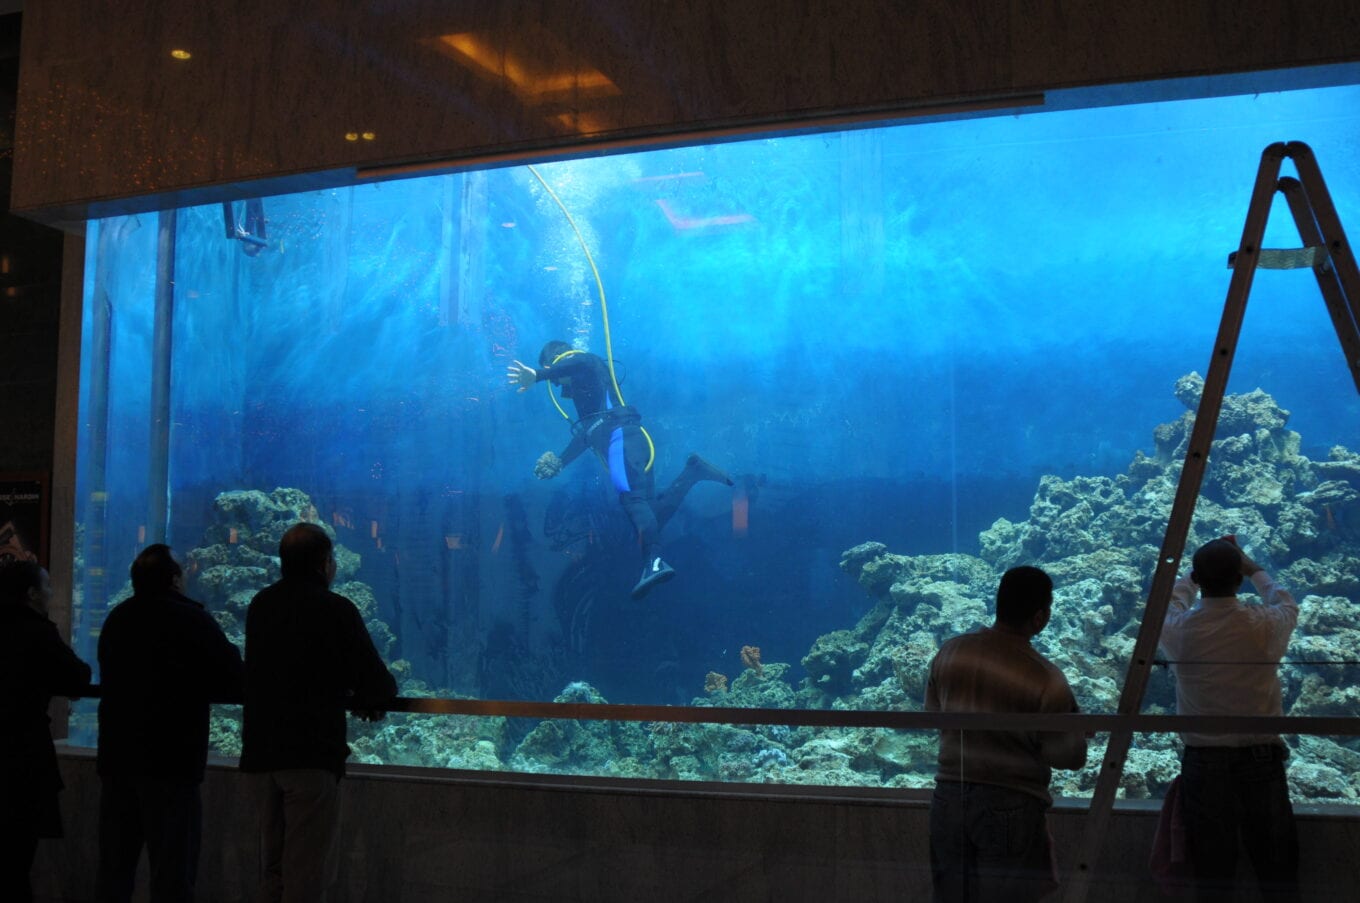 Operating first Turkey's large commercial aquarium tank at the Panora Mall